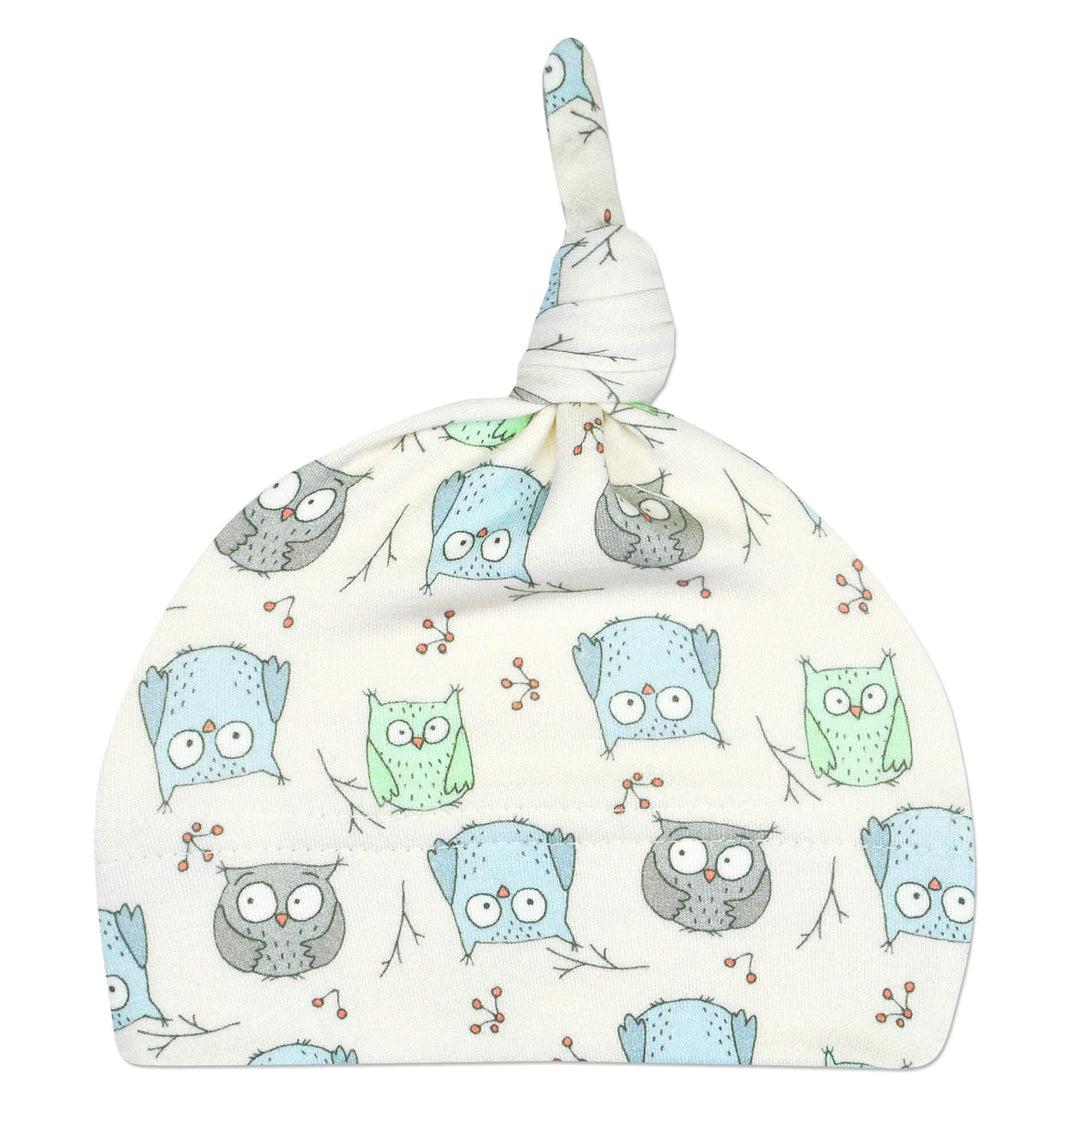 Bamboo Knot Hat in the Night Owl print. The perfect thing for little preemies.